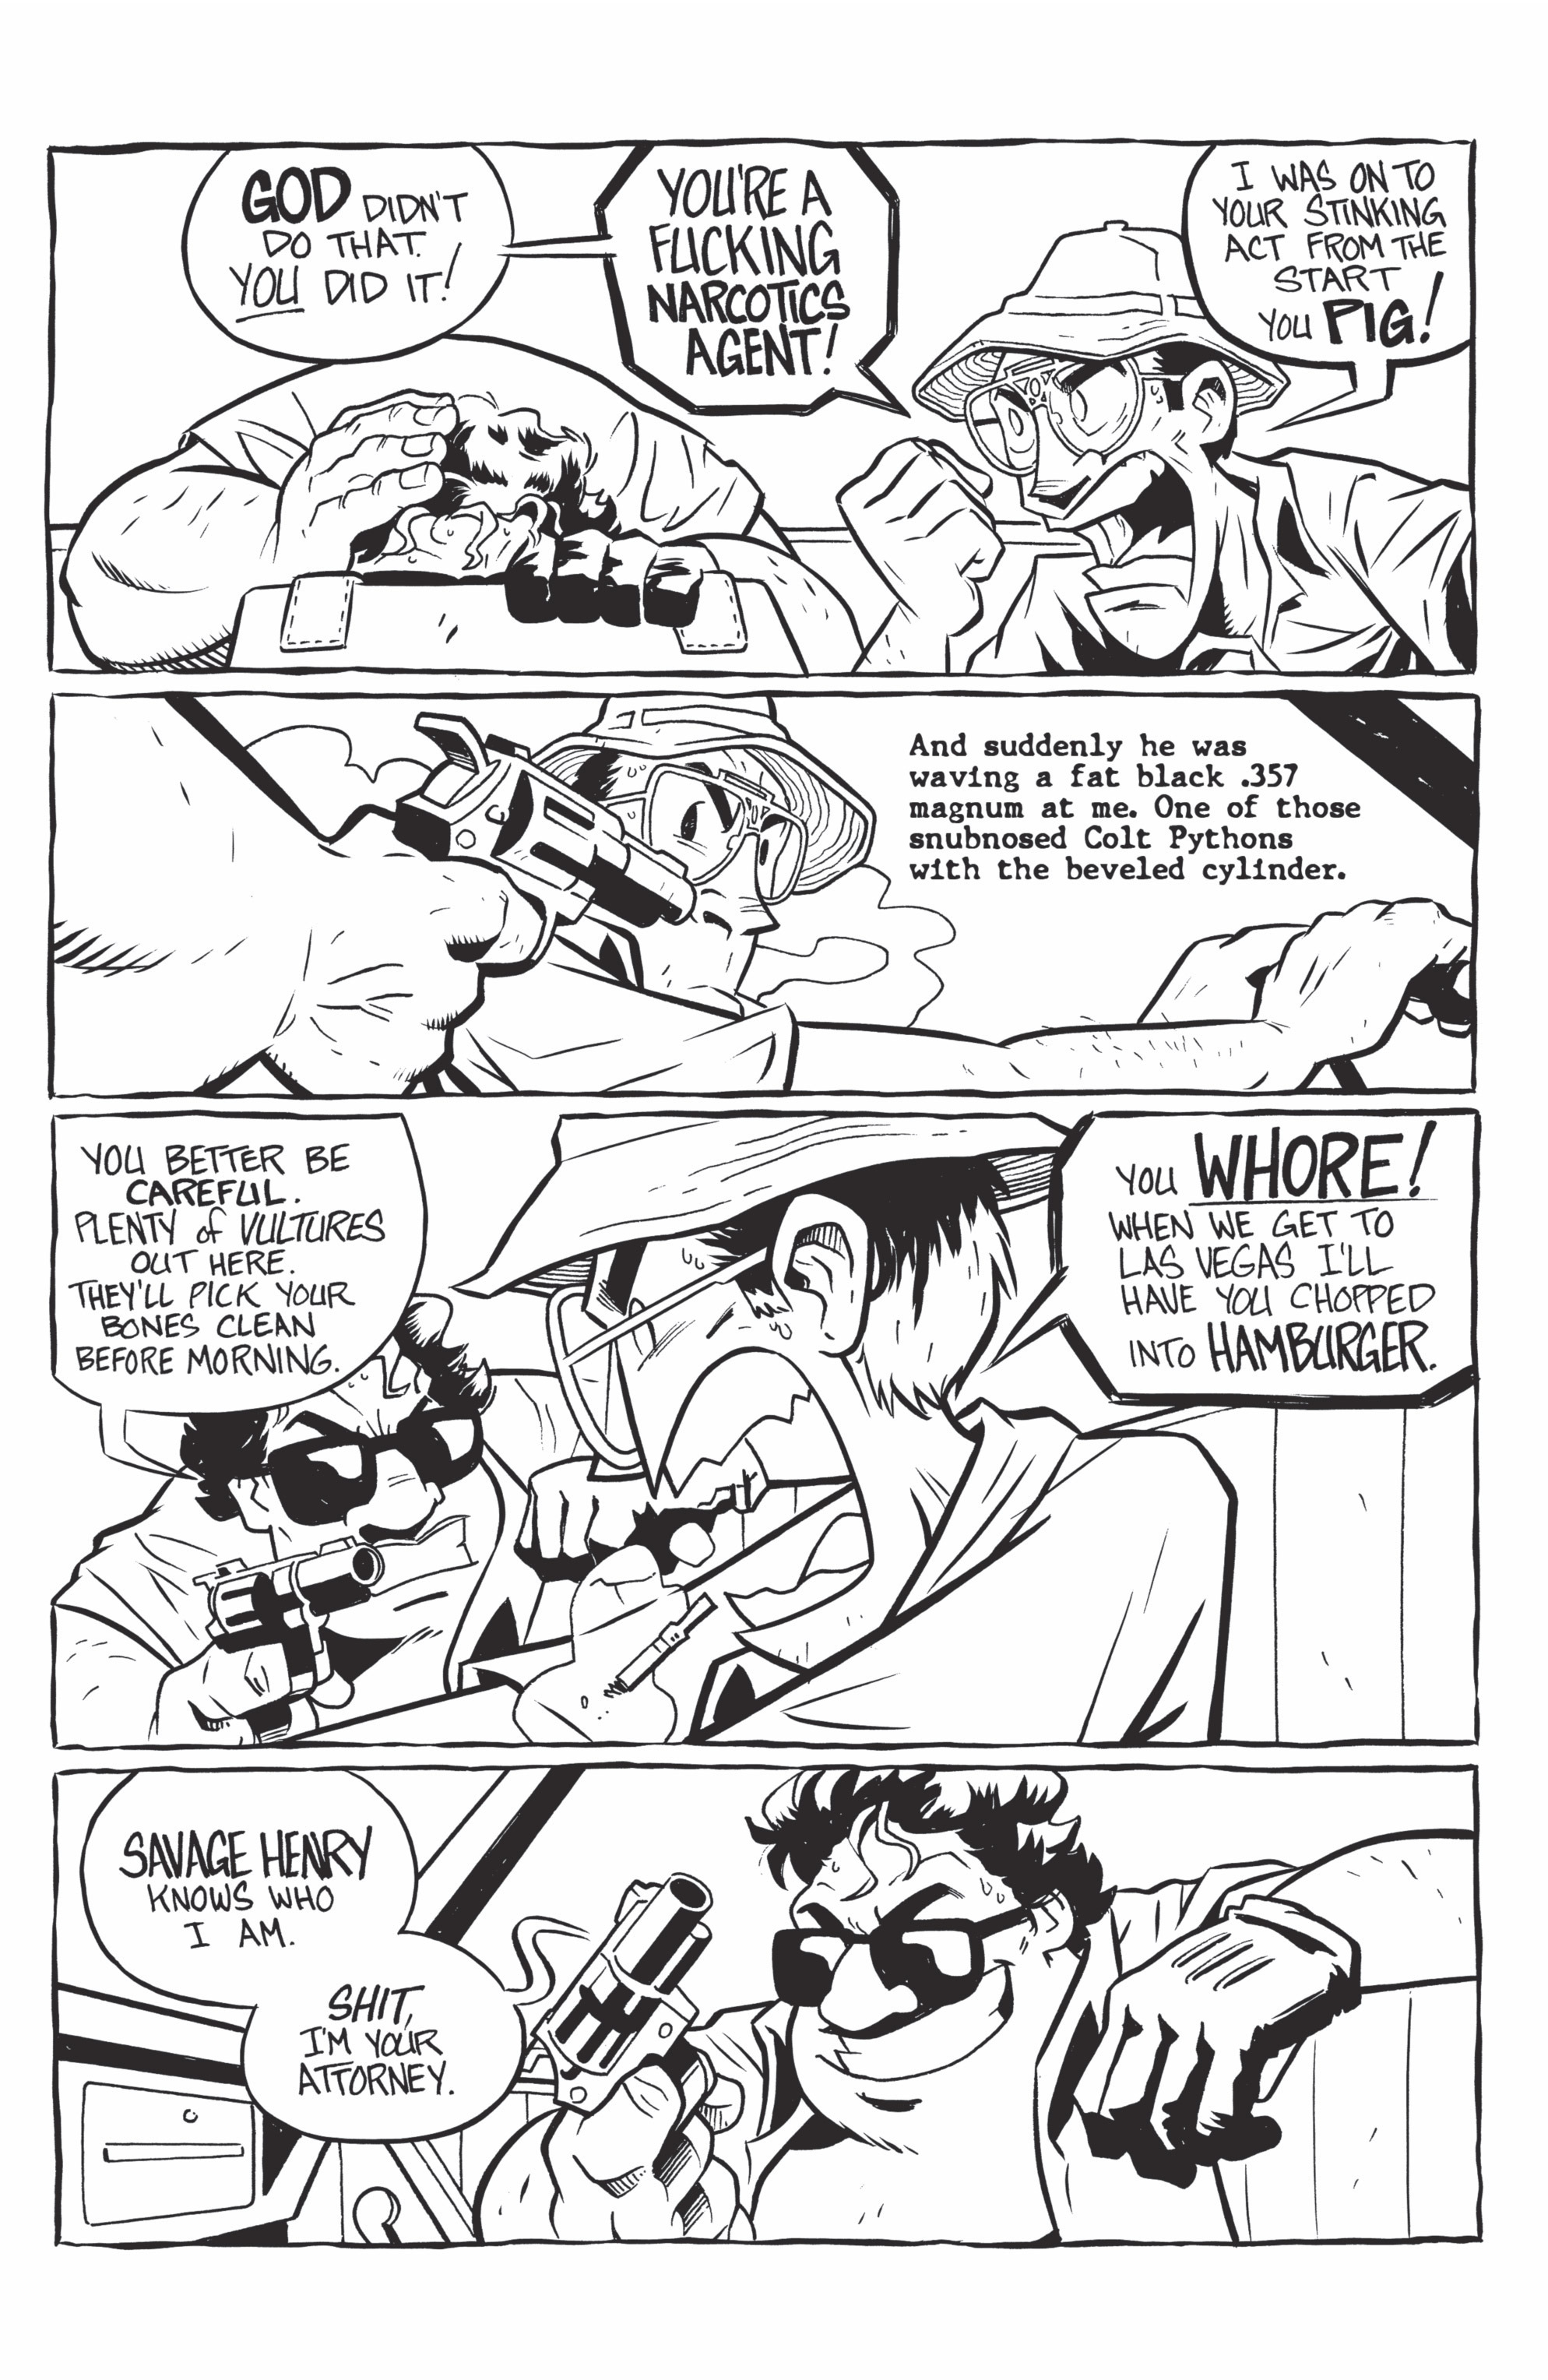 Read online Hunter S. Thompson's Fear and Loathing in Las Vegas comic -  Issue #1 - 29